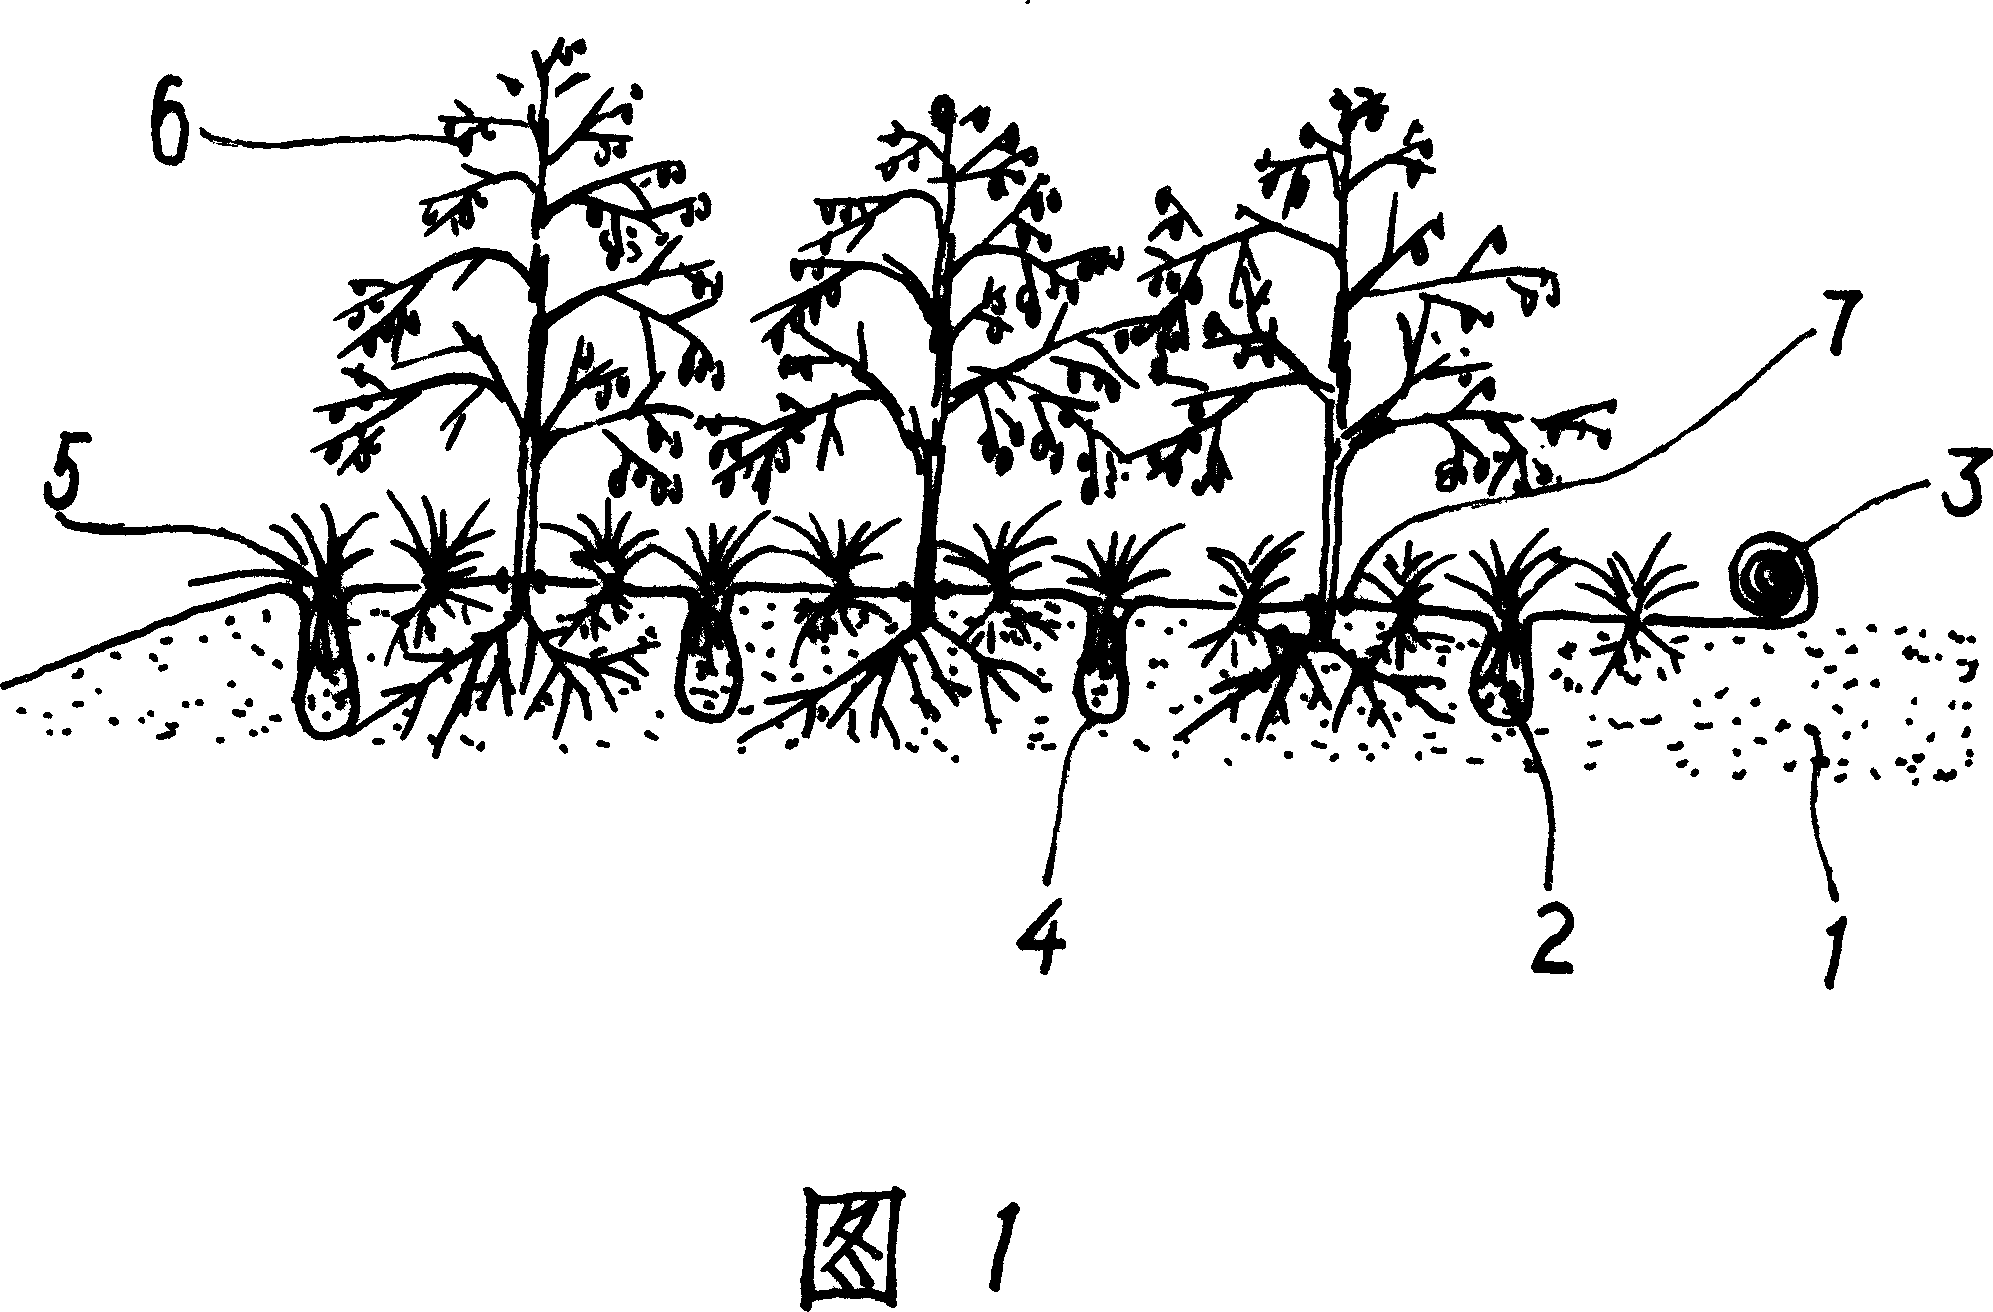 Method for sand prevention and binding and greening with coverlay